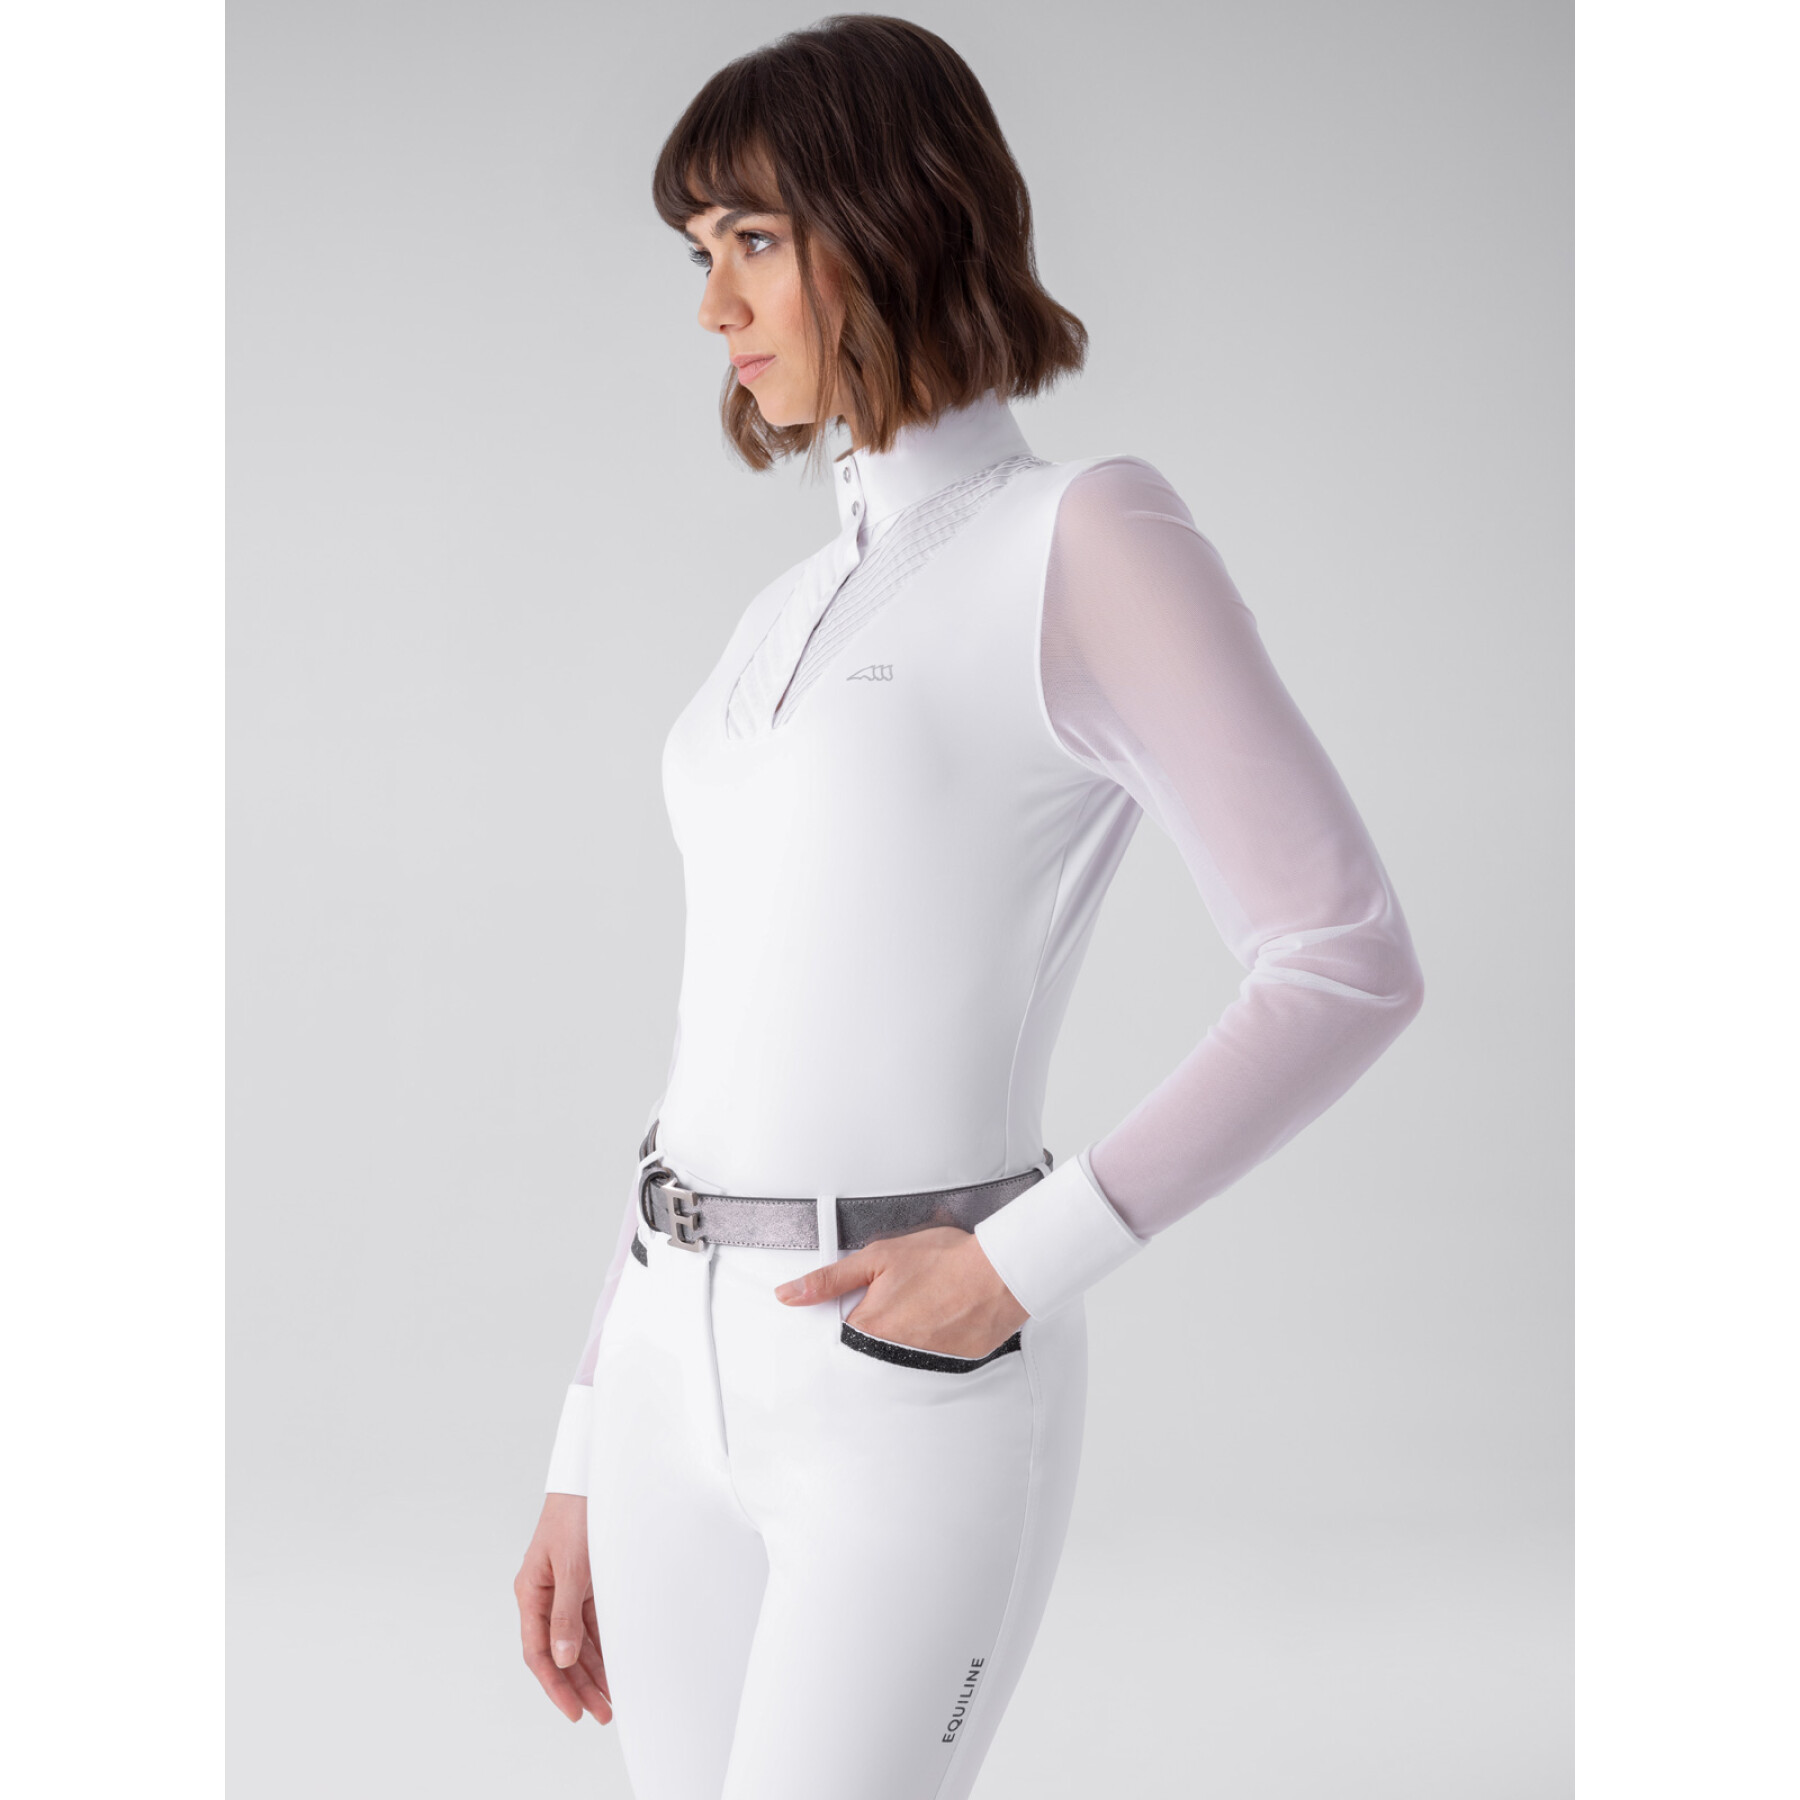 Women's long sleeve competition polo shirt Equiline